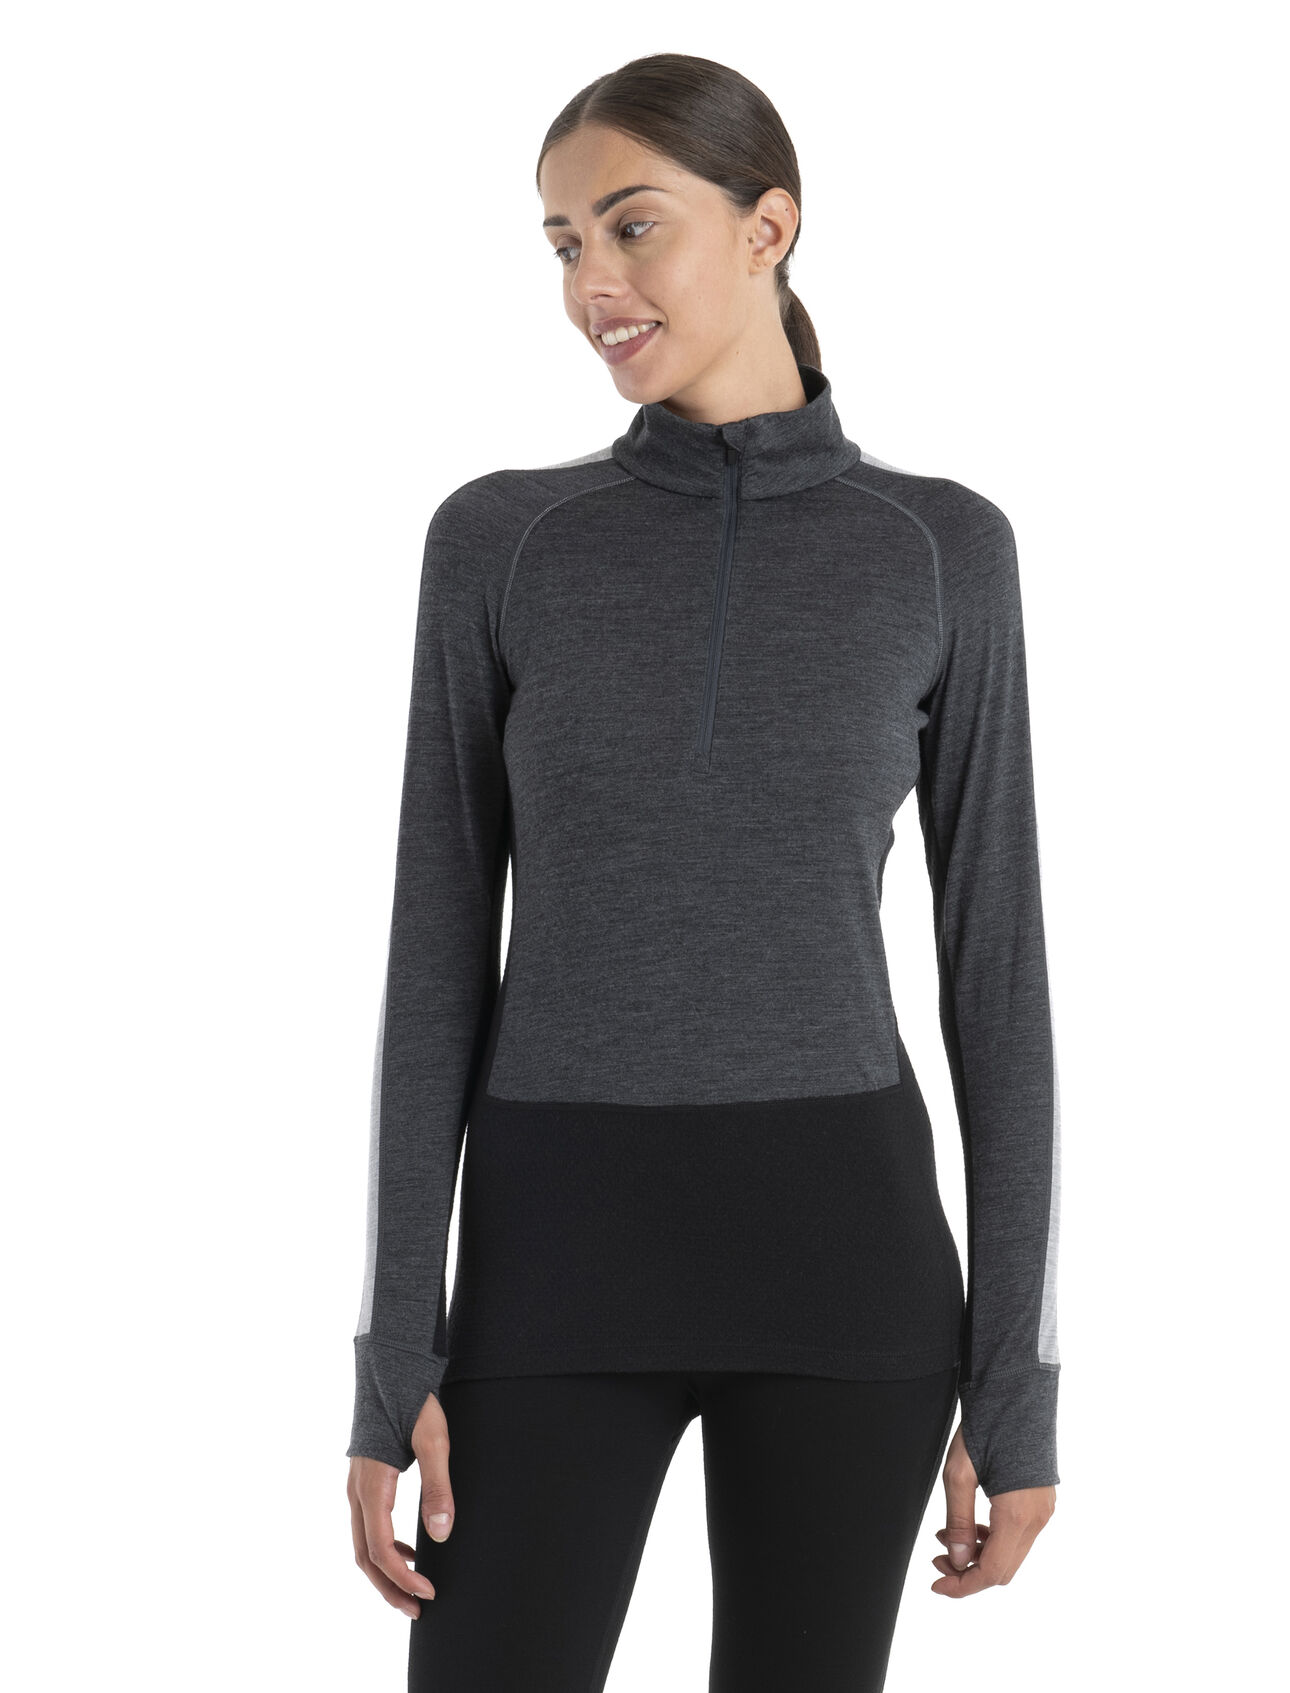 Womens 200 ZoneKnit™ Merino Long Sleeve Half Zip Thermal Top A midweight merino base layer top designed to help regulate temperature during high-intensity activity, the 200 ZoneKnit™ Long Sleeve Half Zip features 100% pure and natural merino wool.